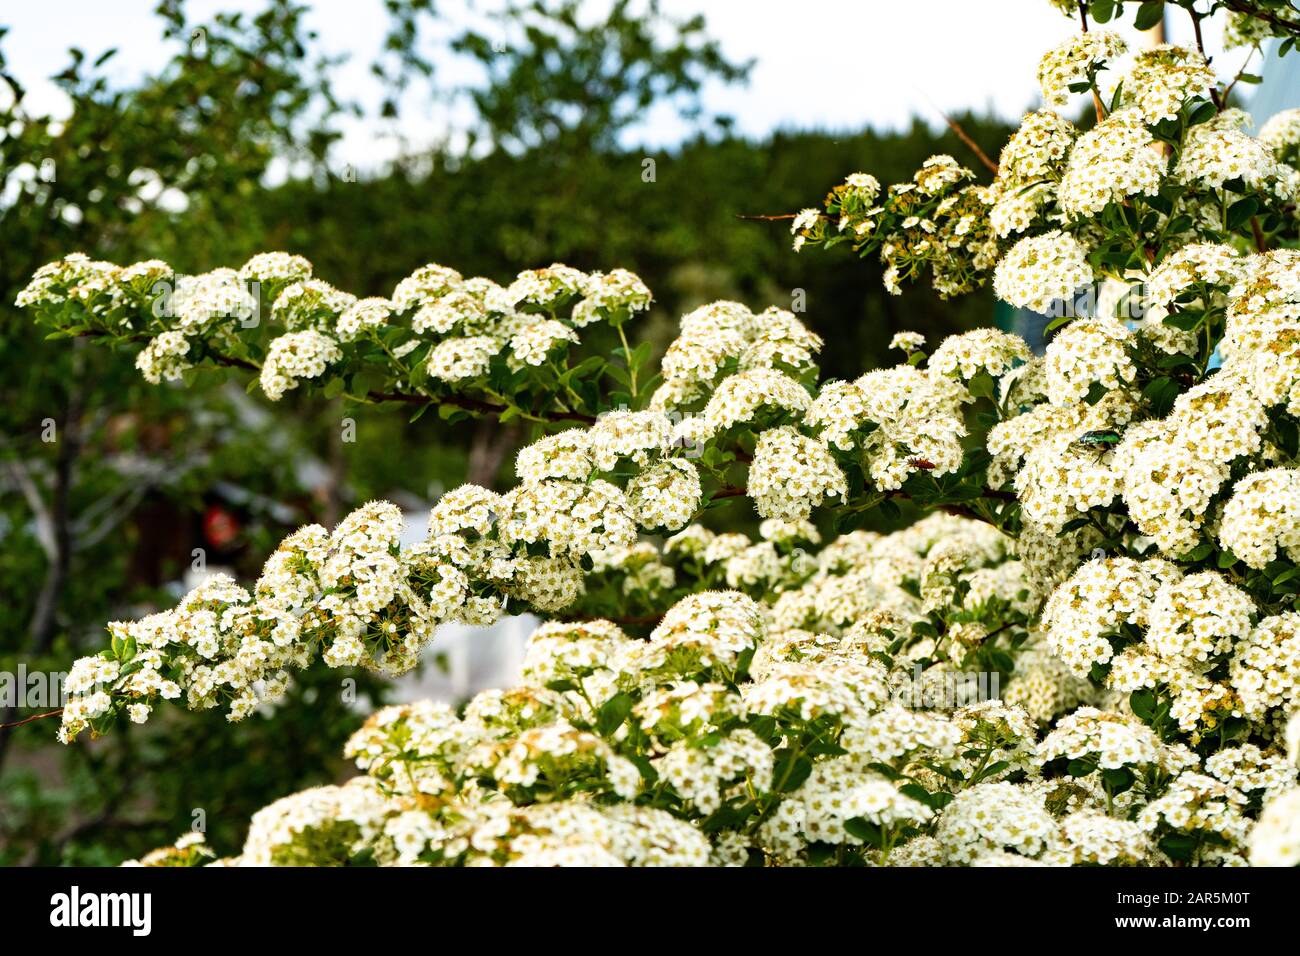 Blooming spirea or meadowsweet. Branches with white flowers. Stock Photo